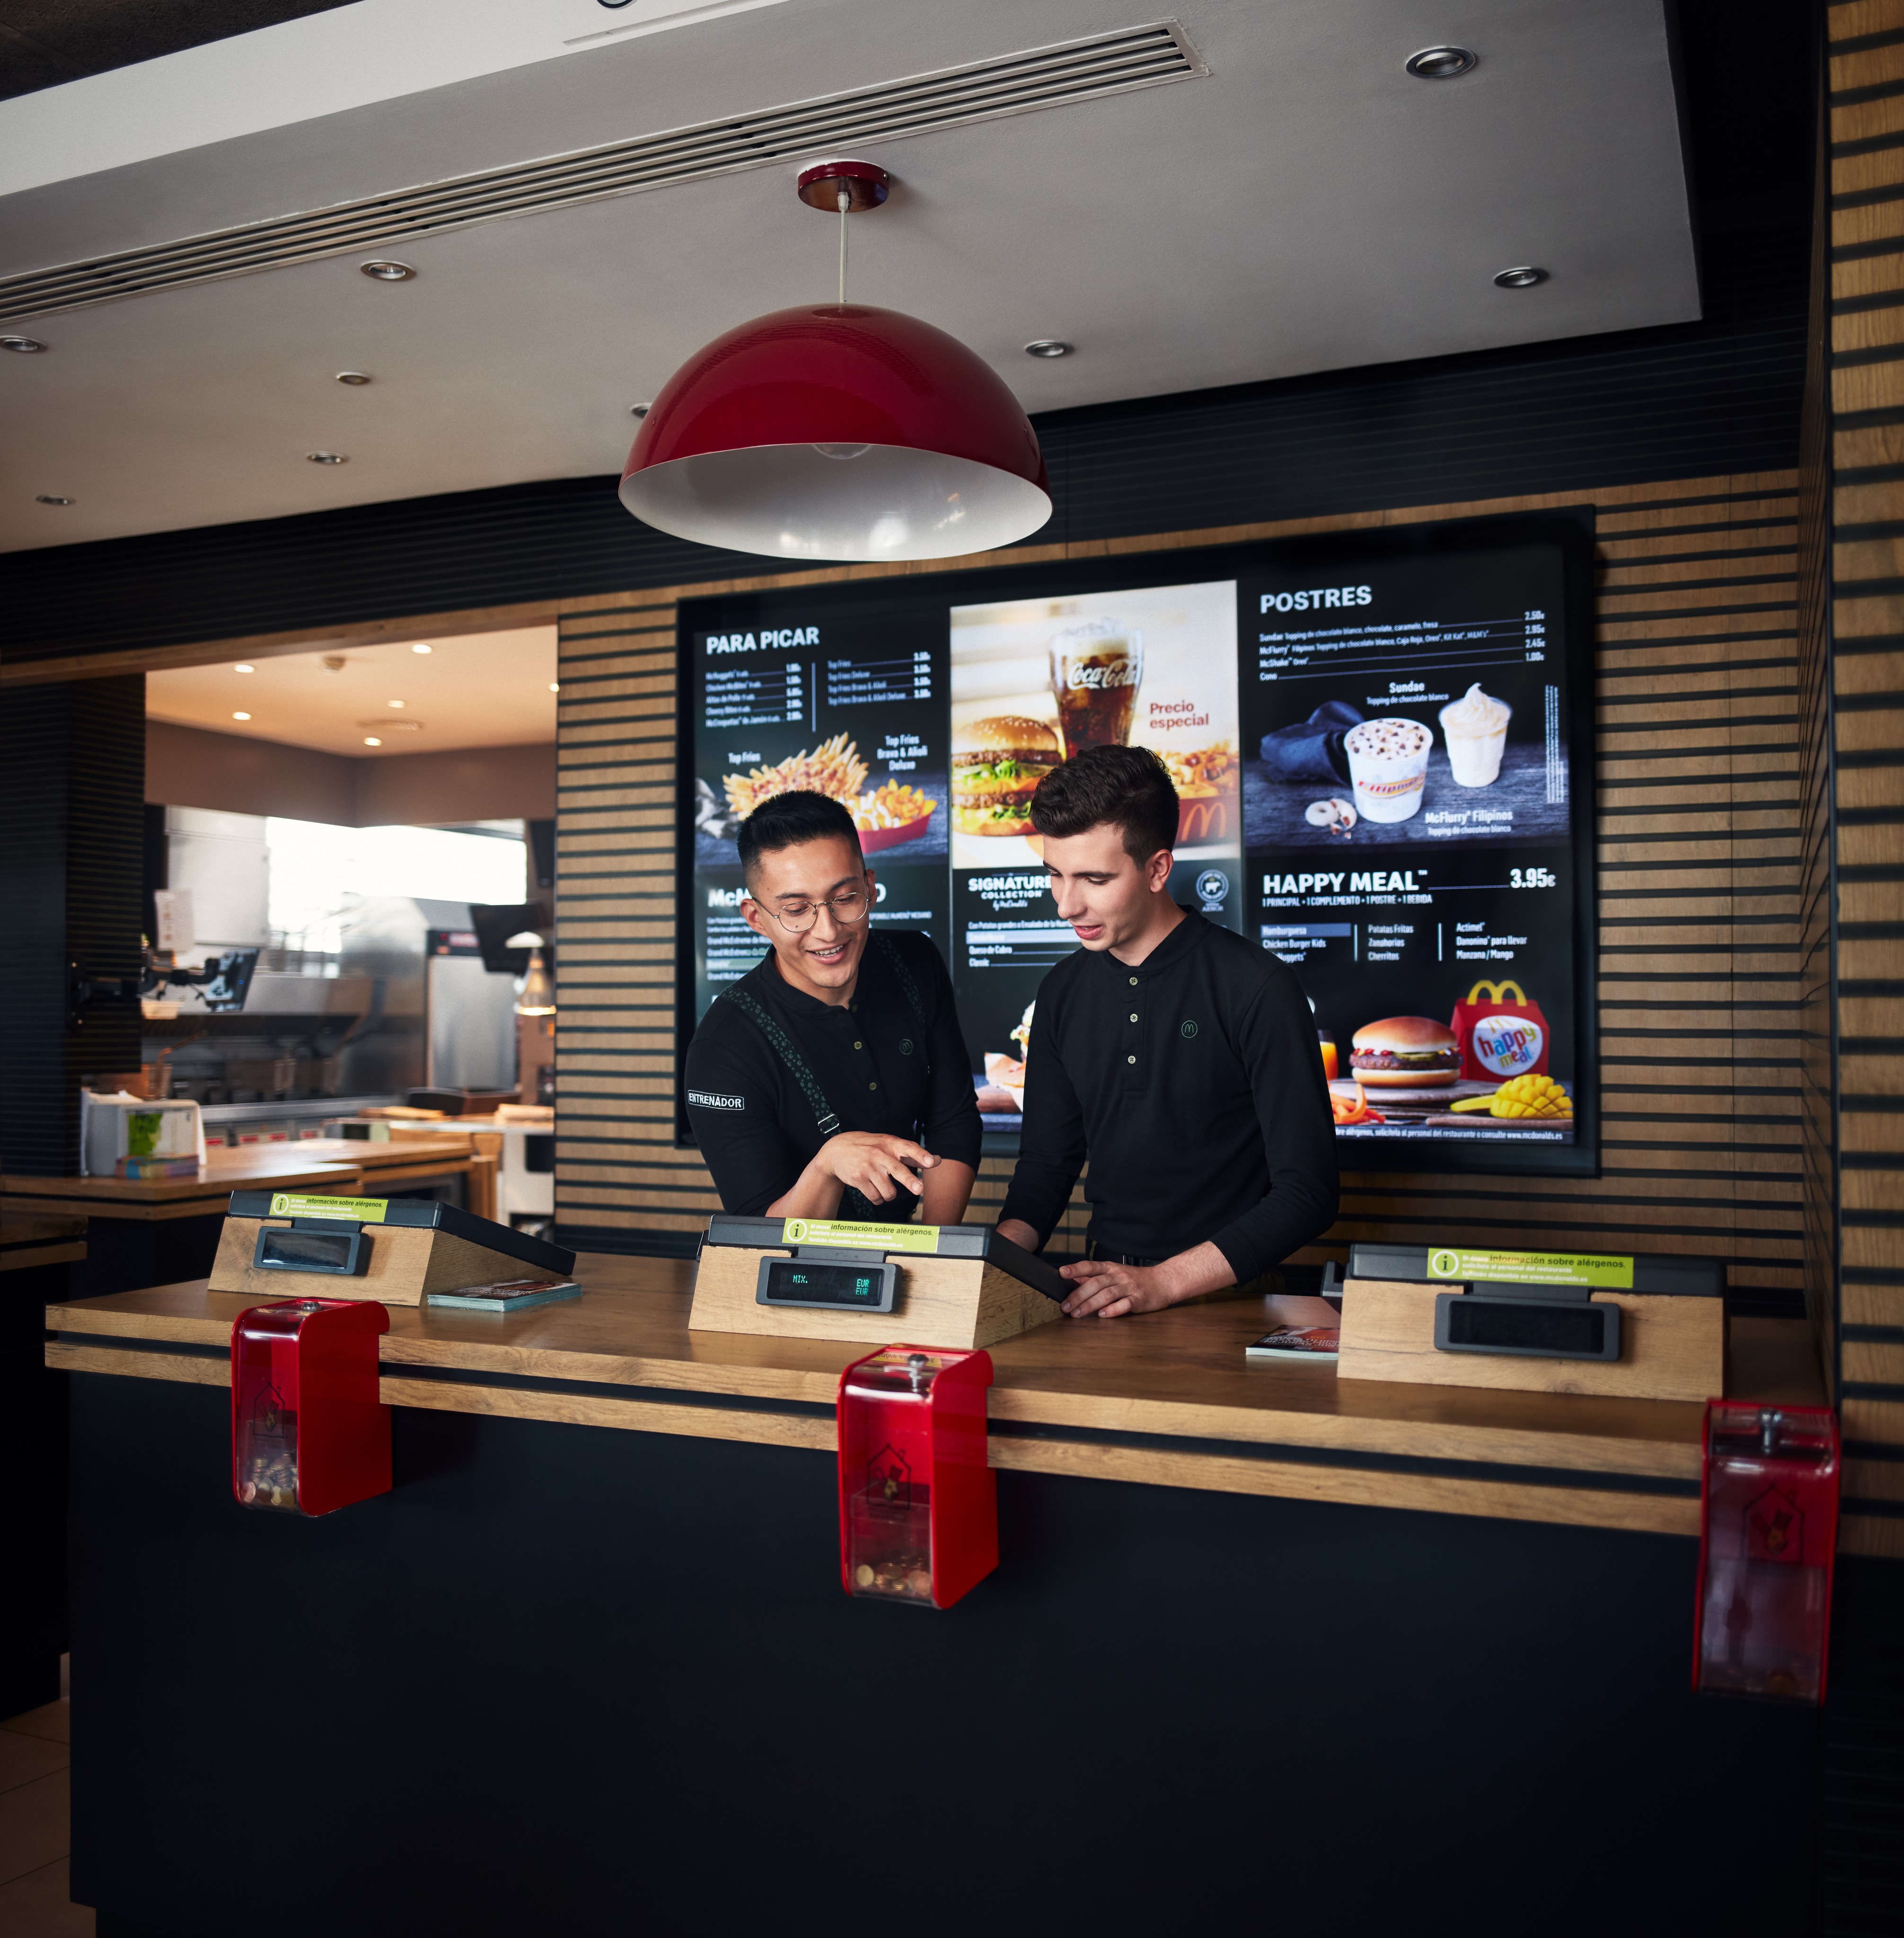 How McDonald's is Using Meta's Workplace to Enhance their Employees Experience